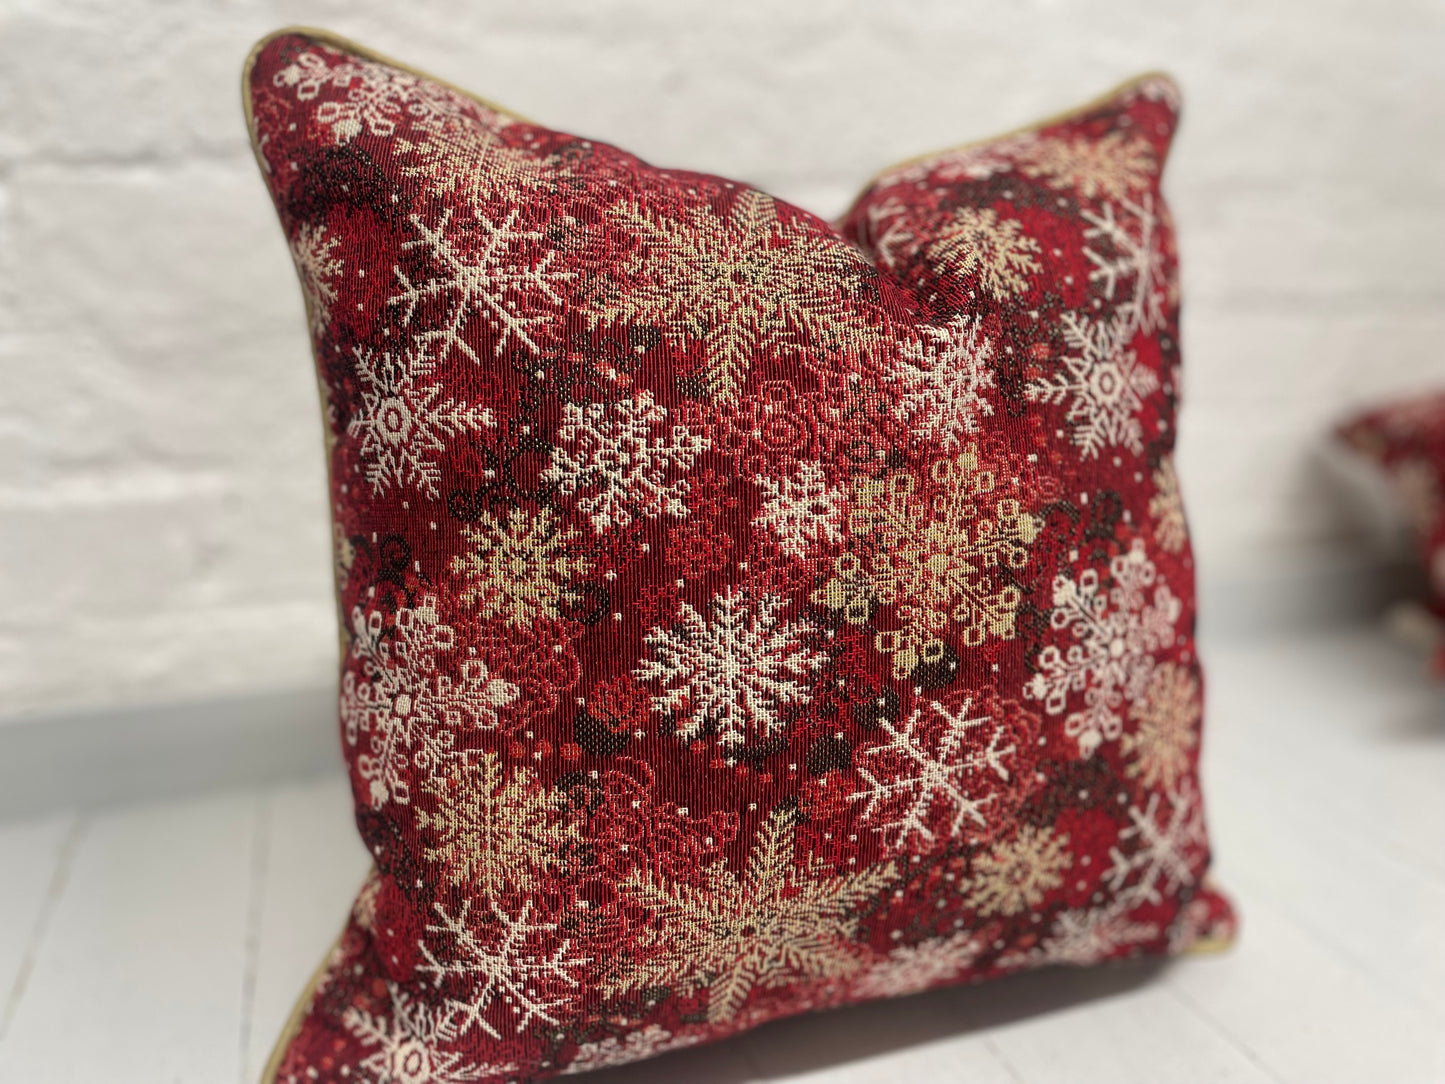 Snowflake Cushion with gold piping.